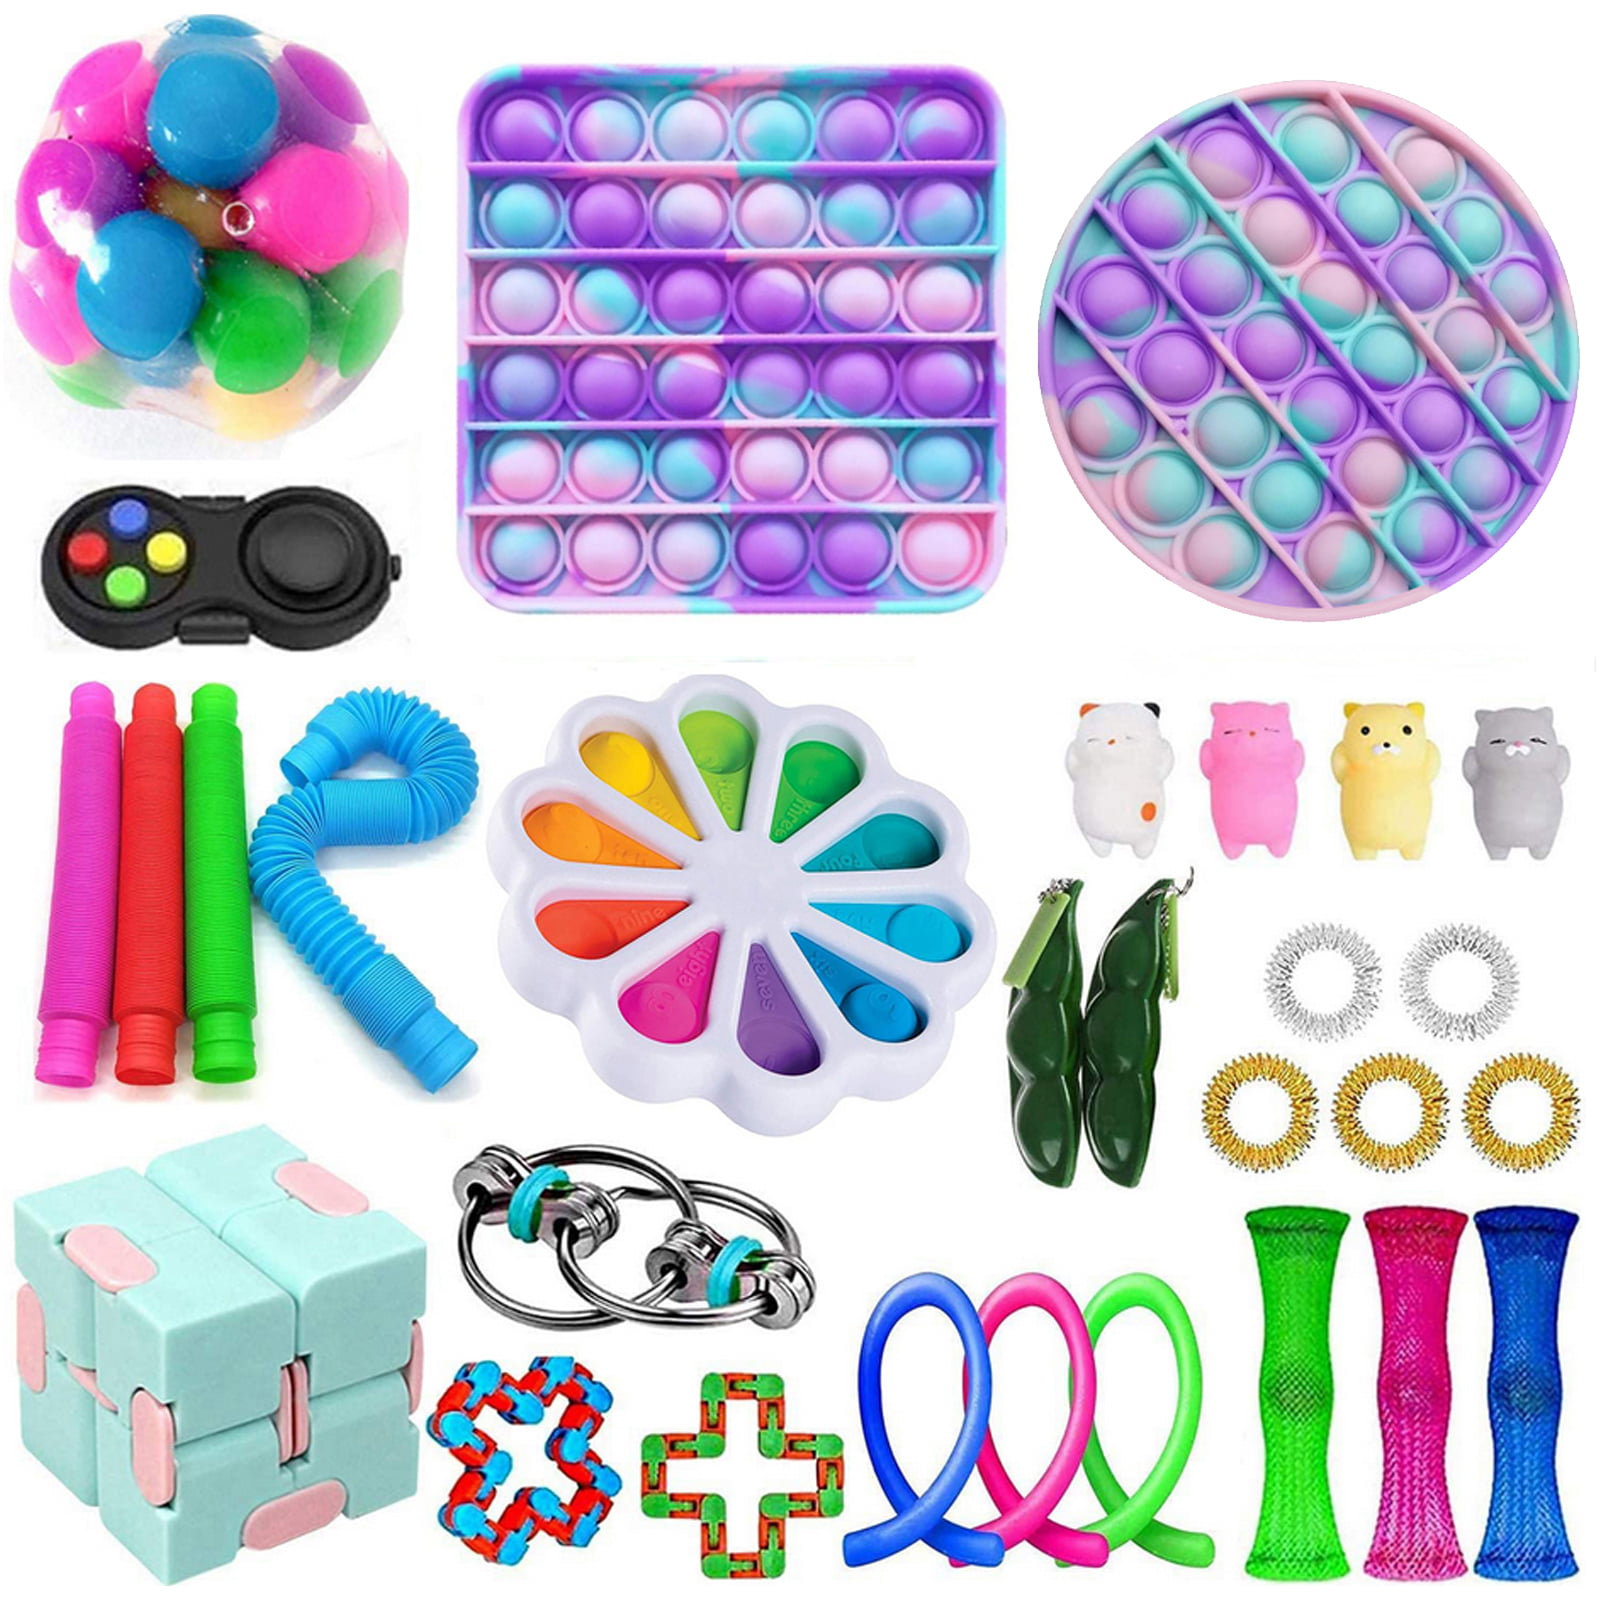 Details about   Kids Autism ADHD Stress Fidget Toys Stress Relief Special Needs Sensory Toys US 